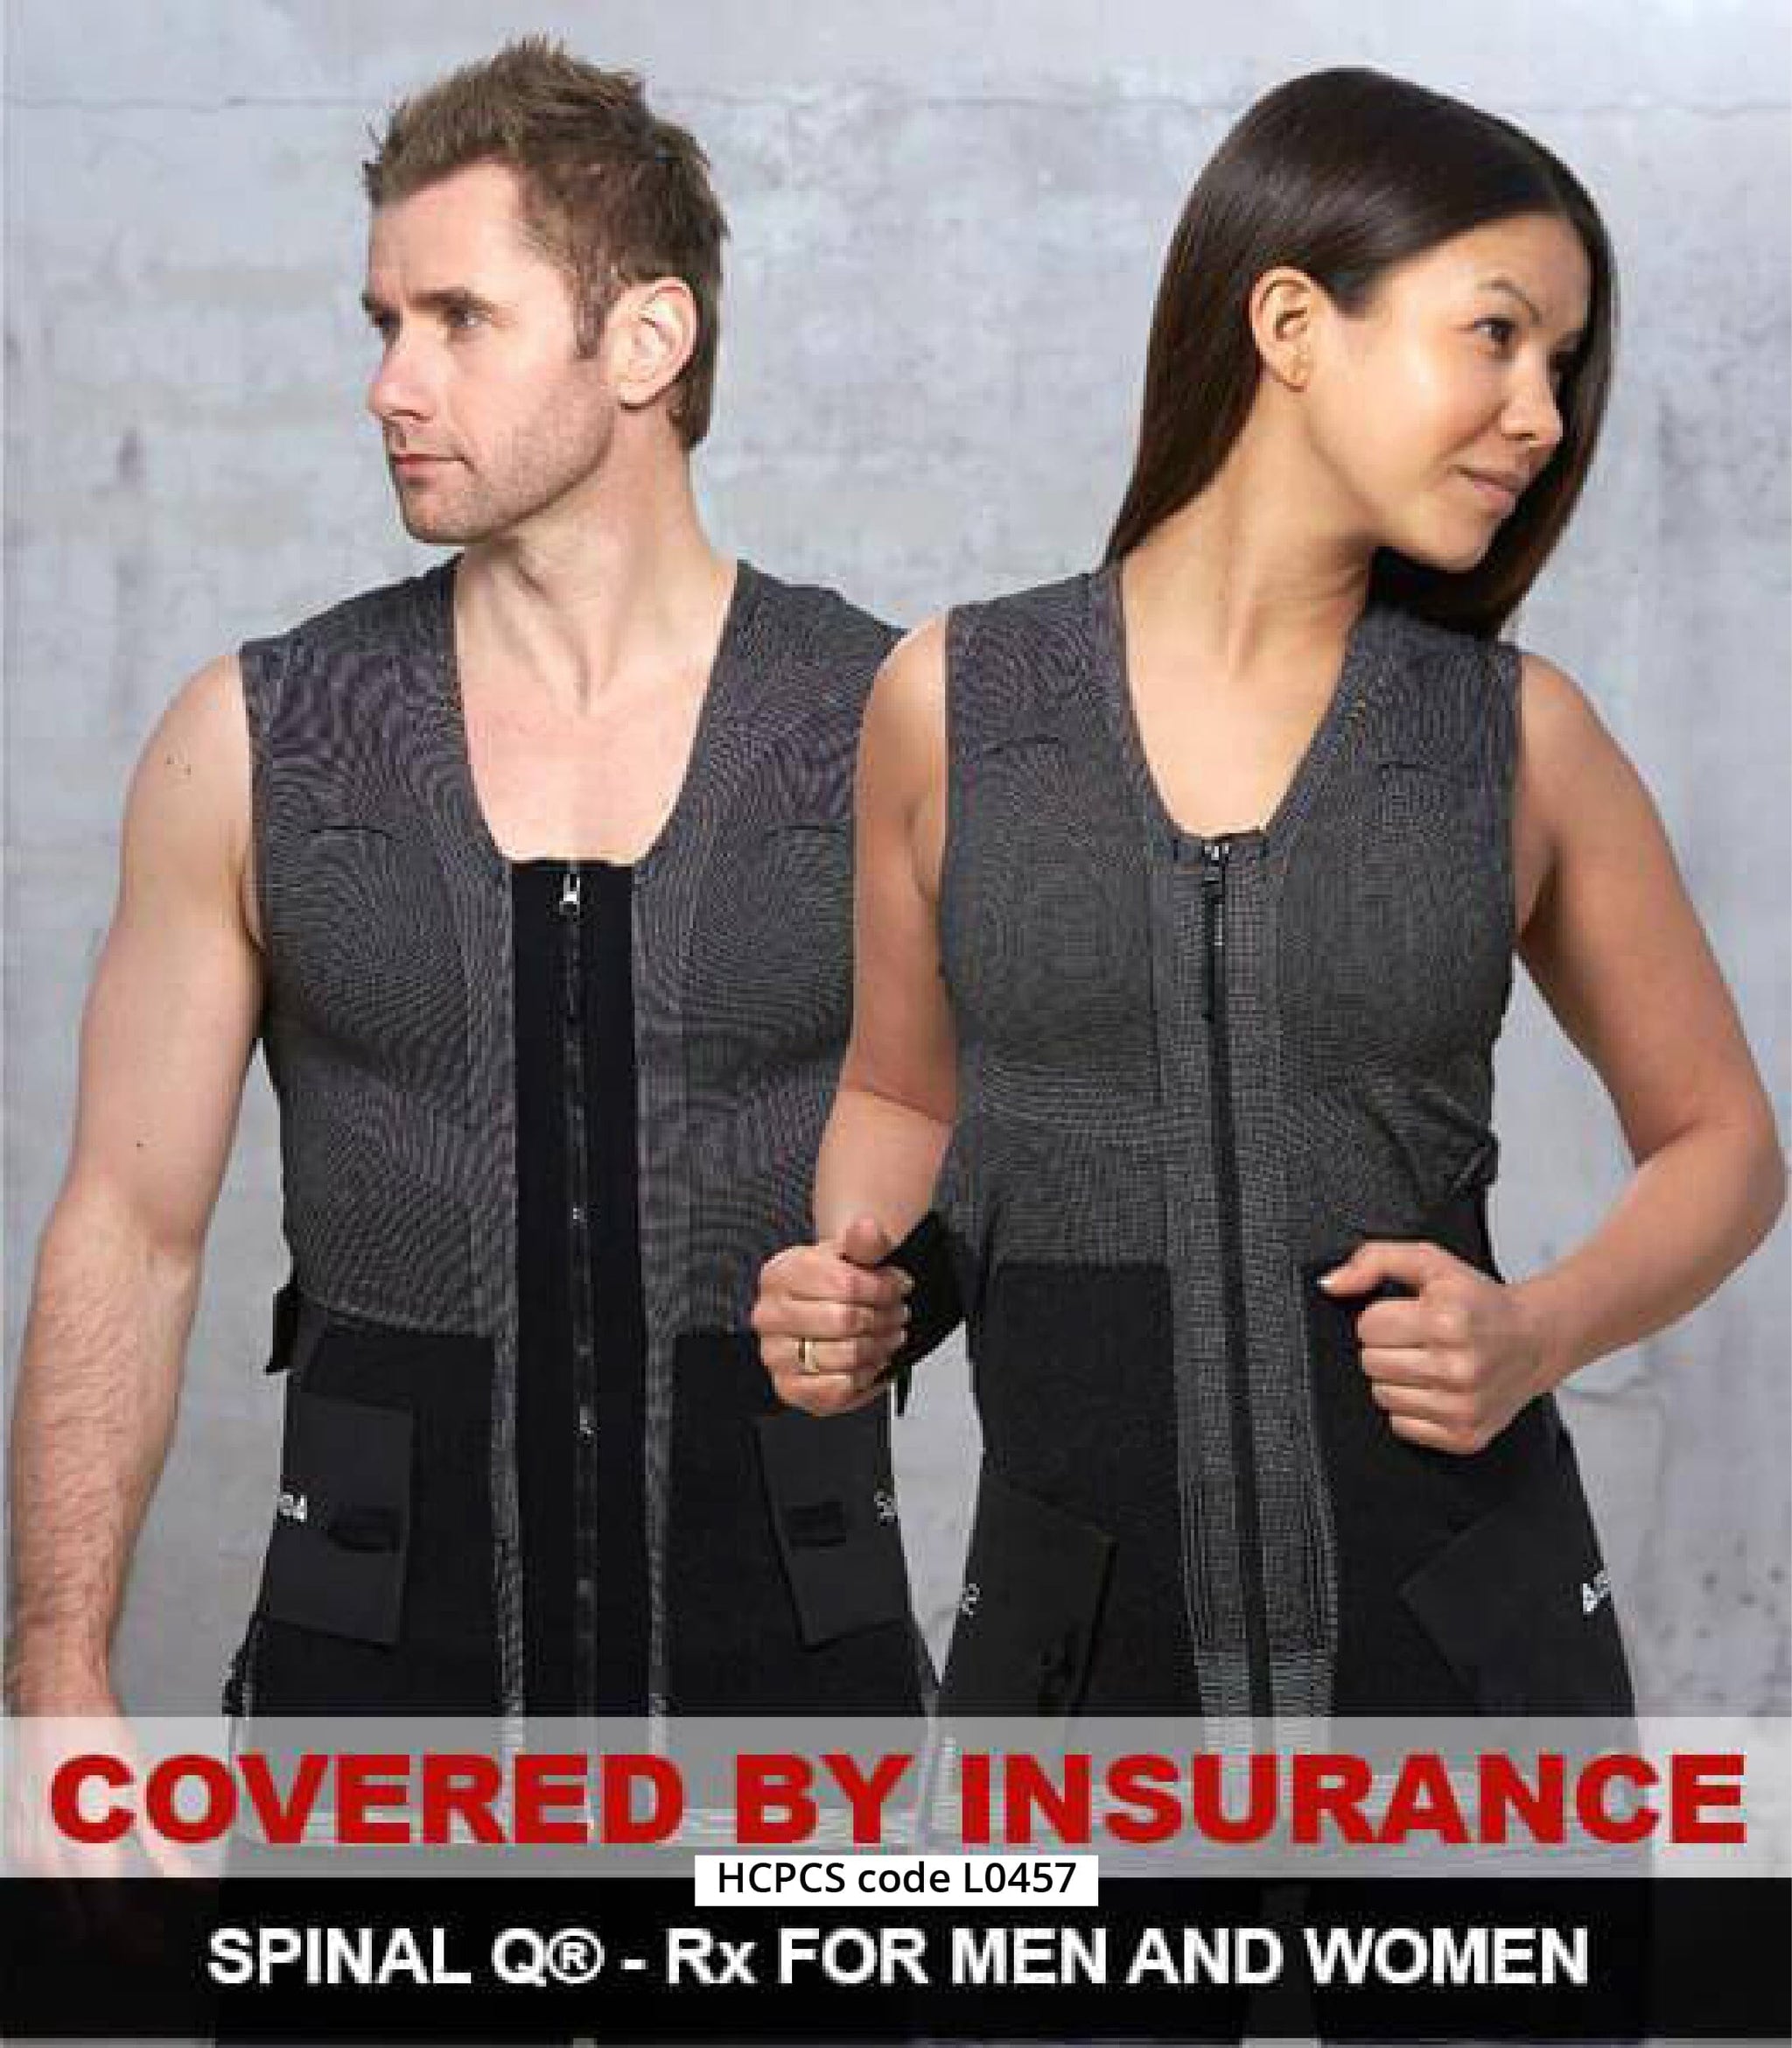 Posture Corrector Back Support Brace - Small, Shop Today. Get it Tomorrow!